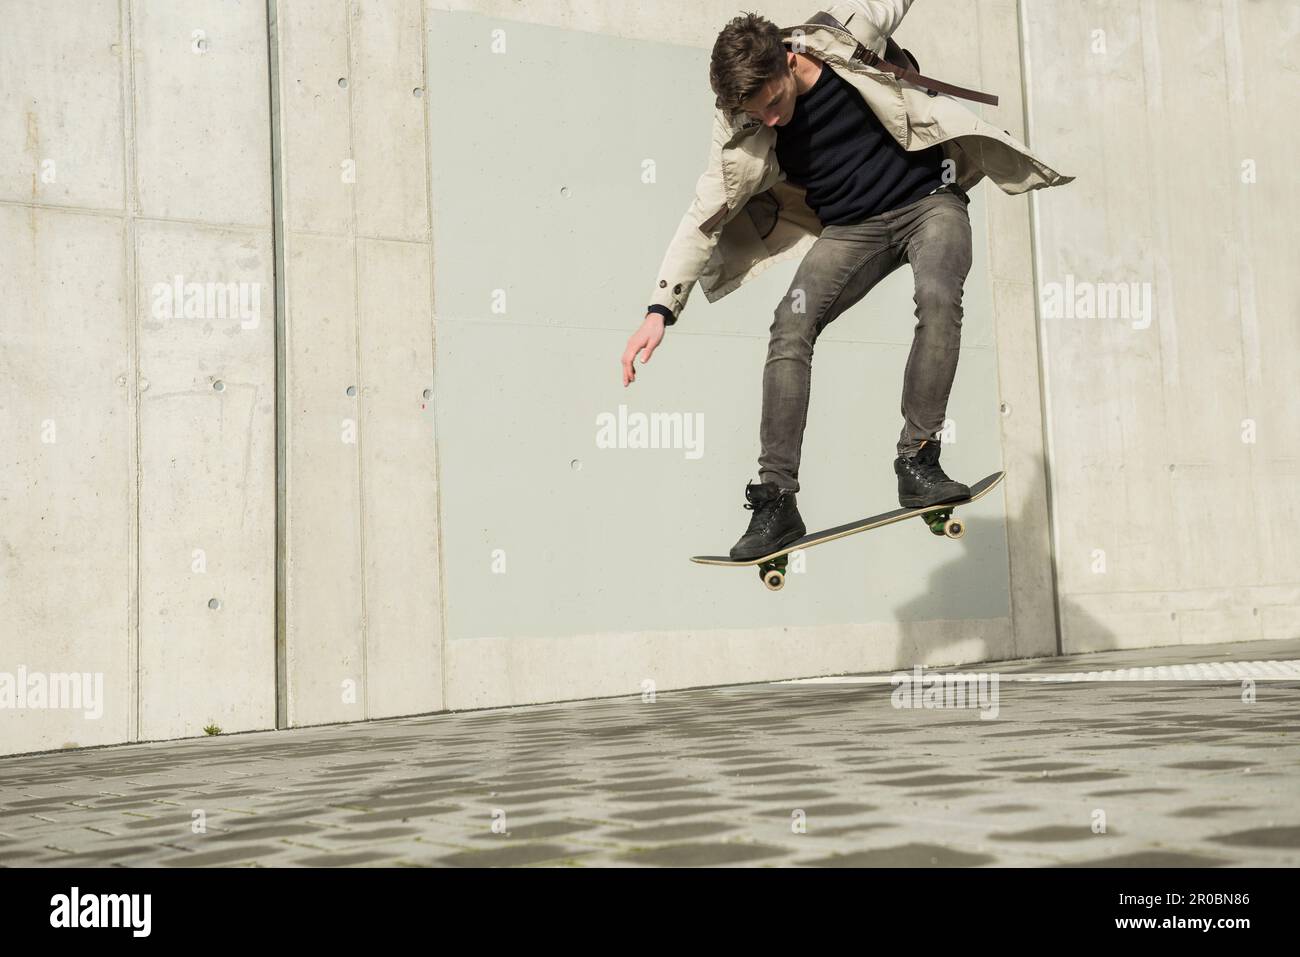 Young man jumping with skateboard in mid-air, Munich, Bavaria, Germany Stock Photo